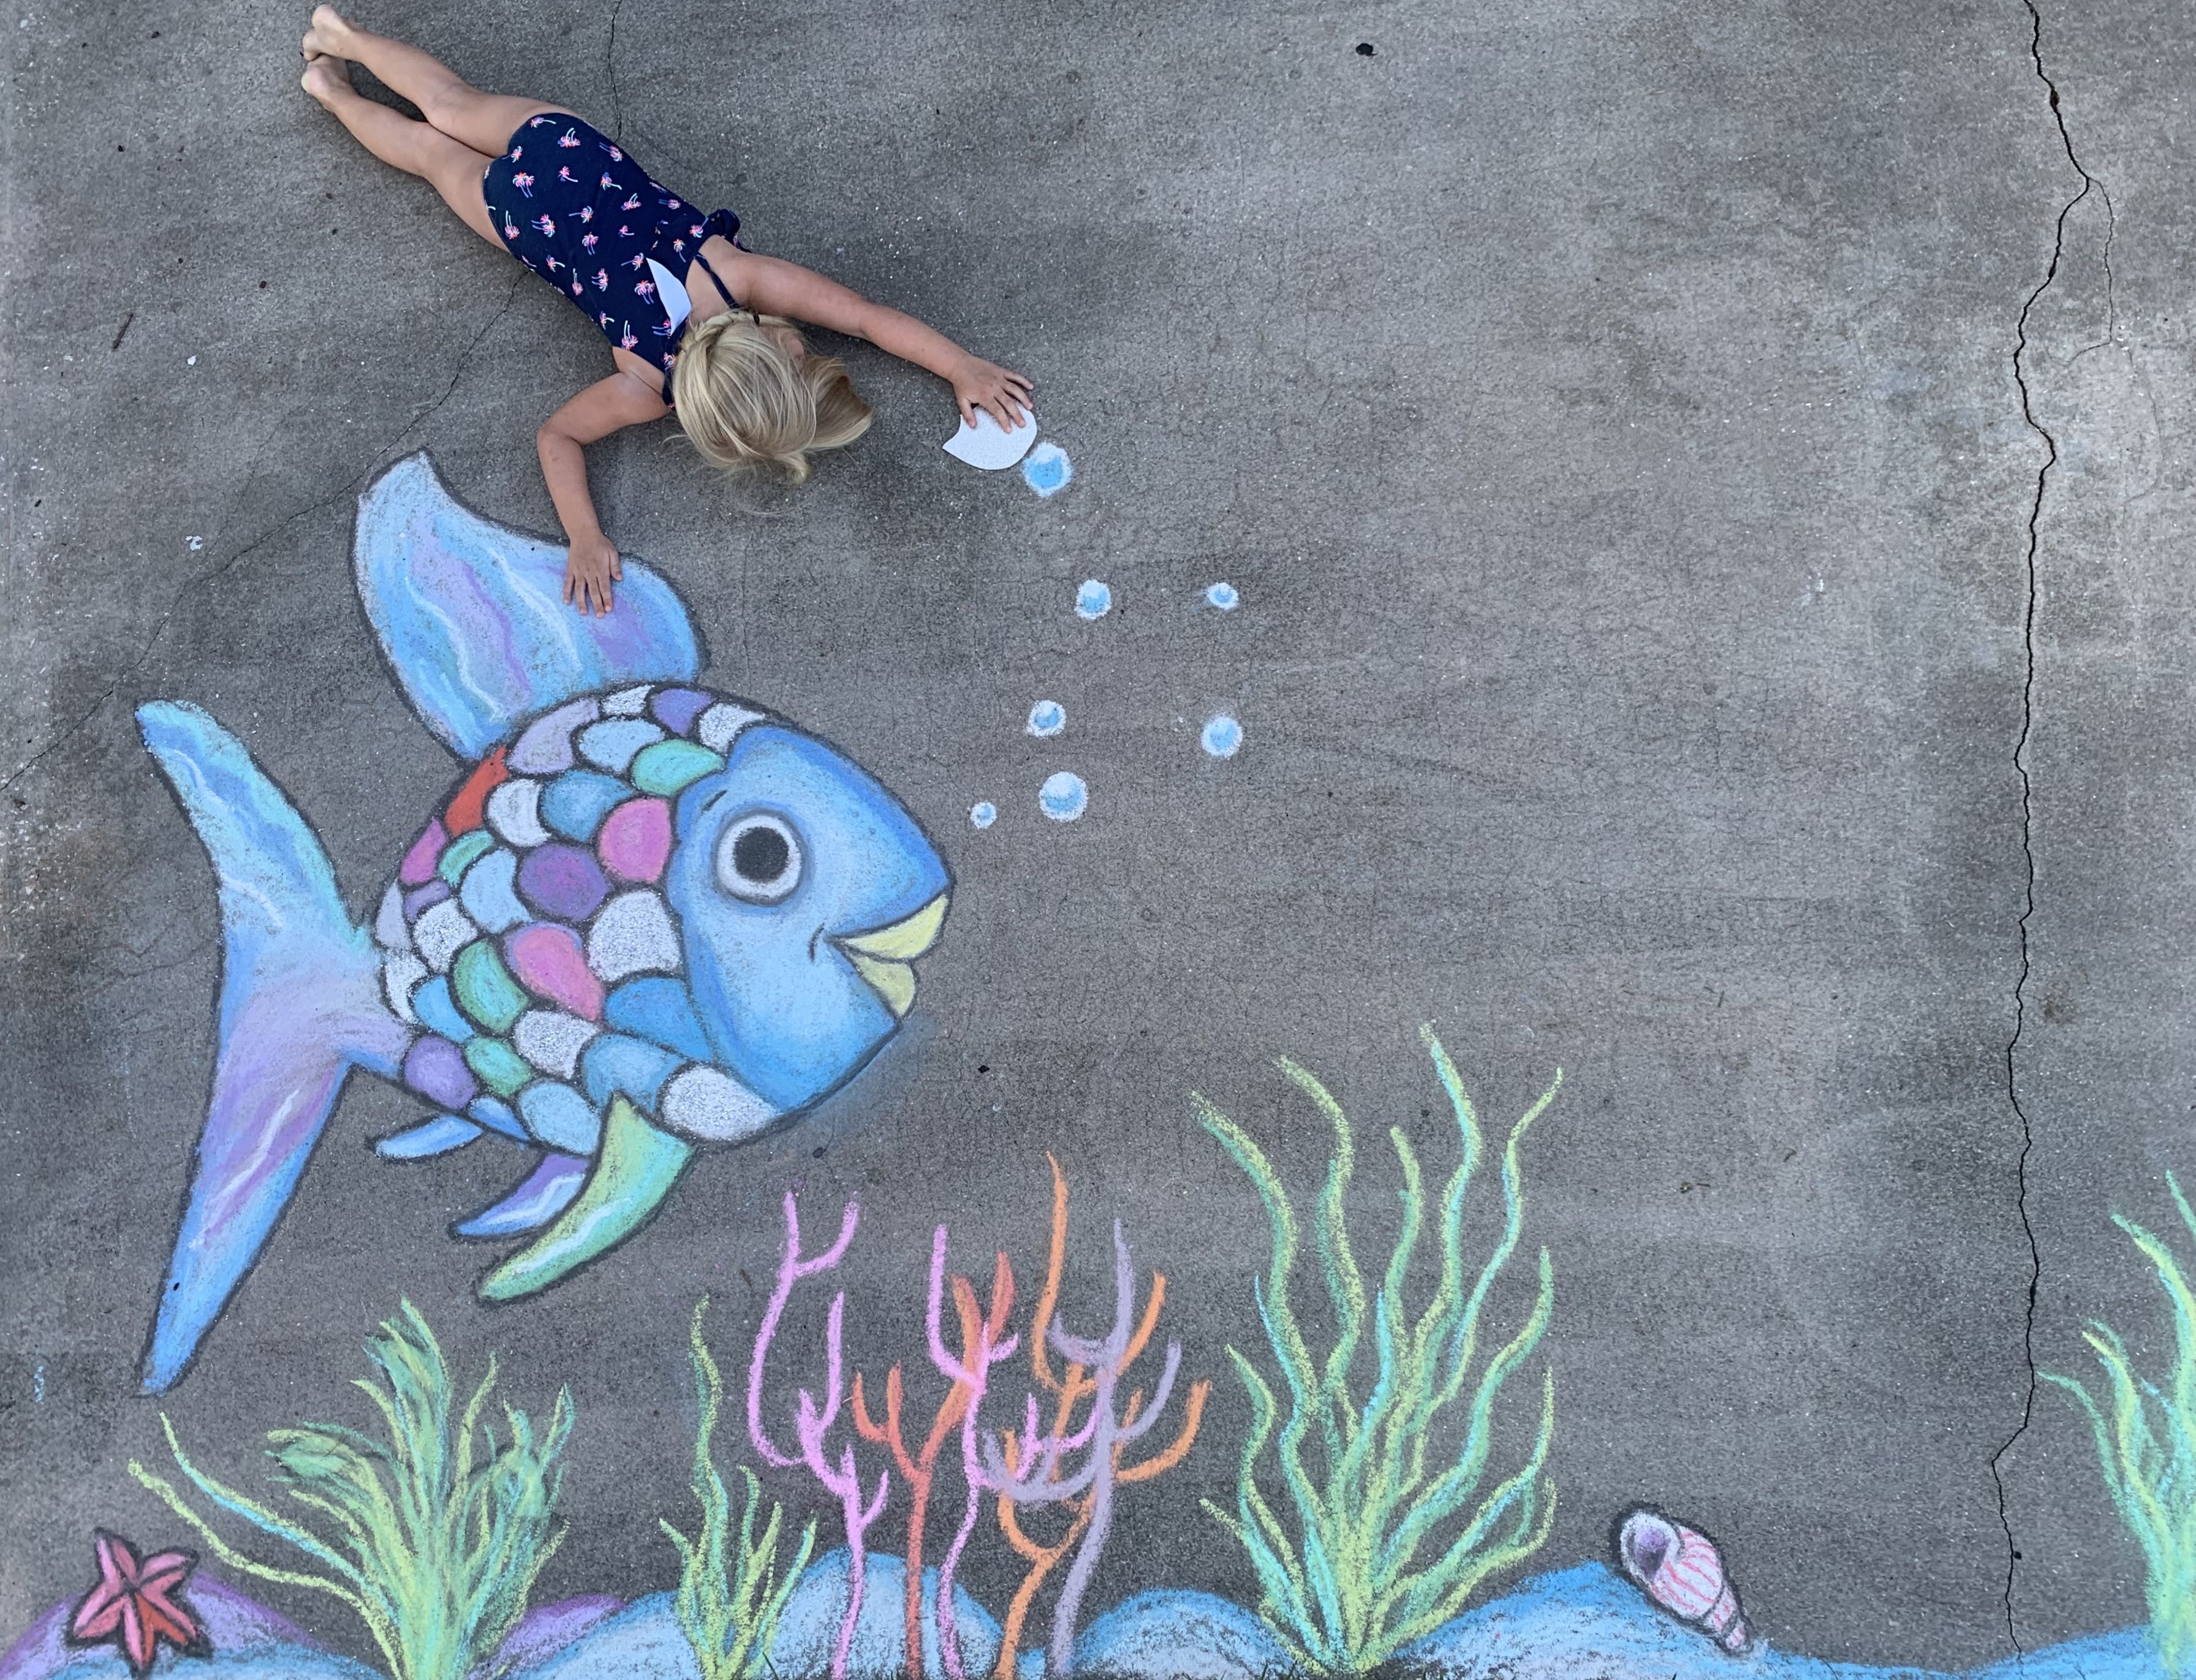 Child drawing a fish on the sidewalk